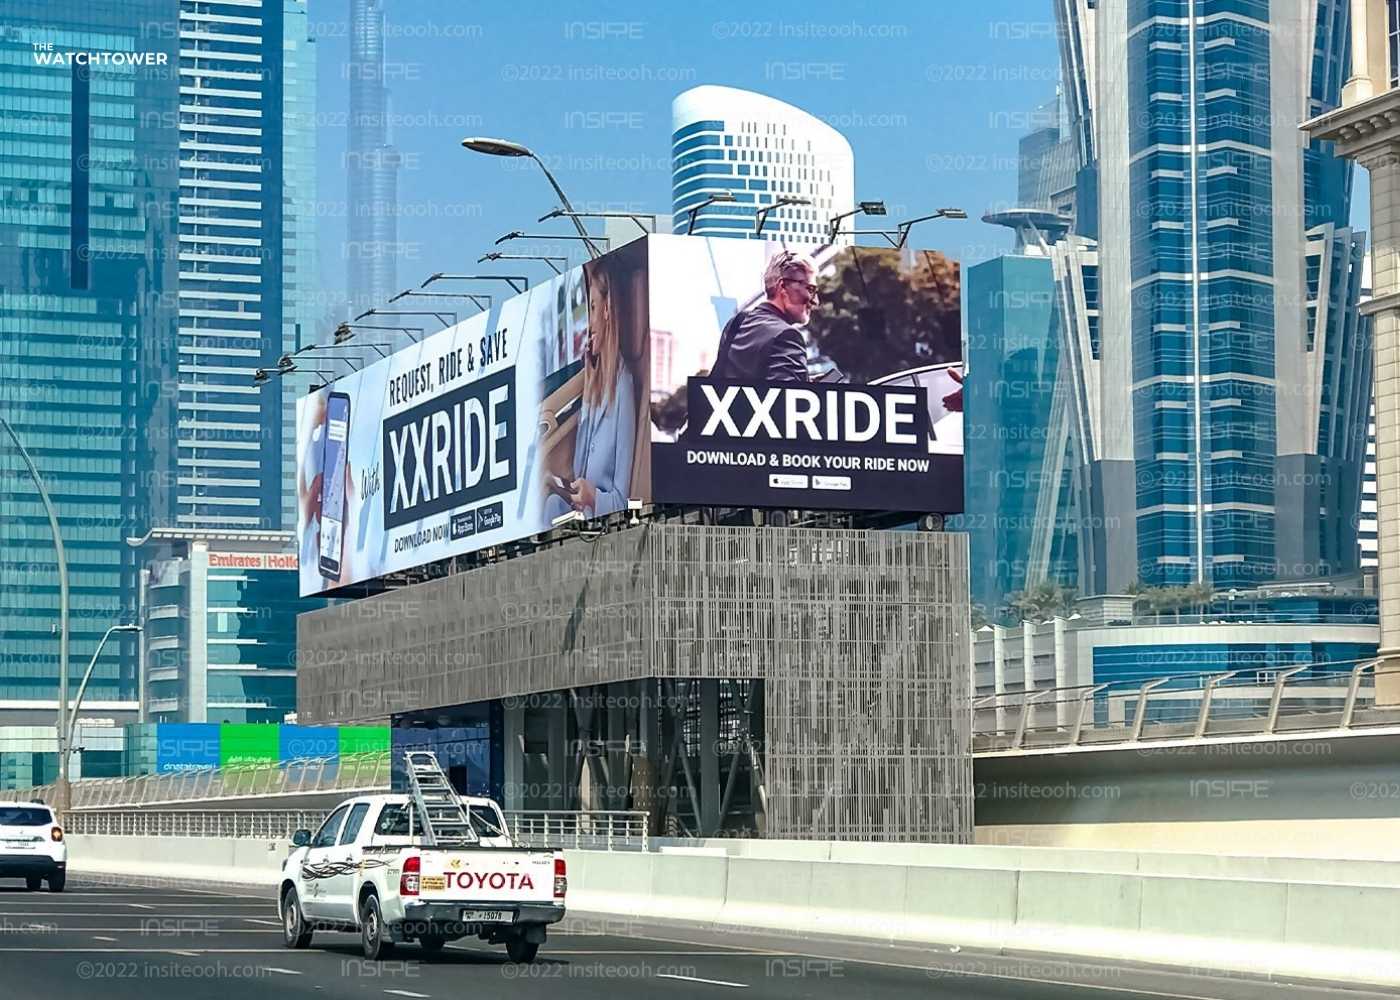 What comes to mind when you see XXRIDE? 